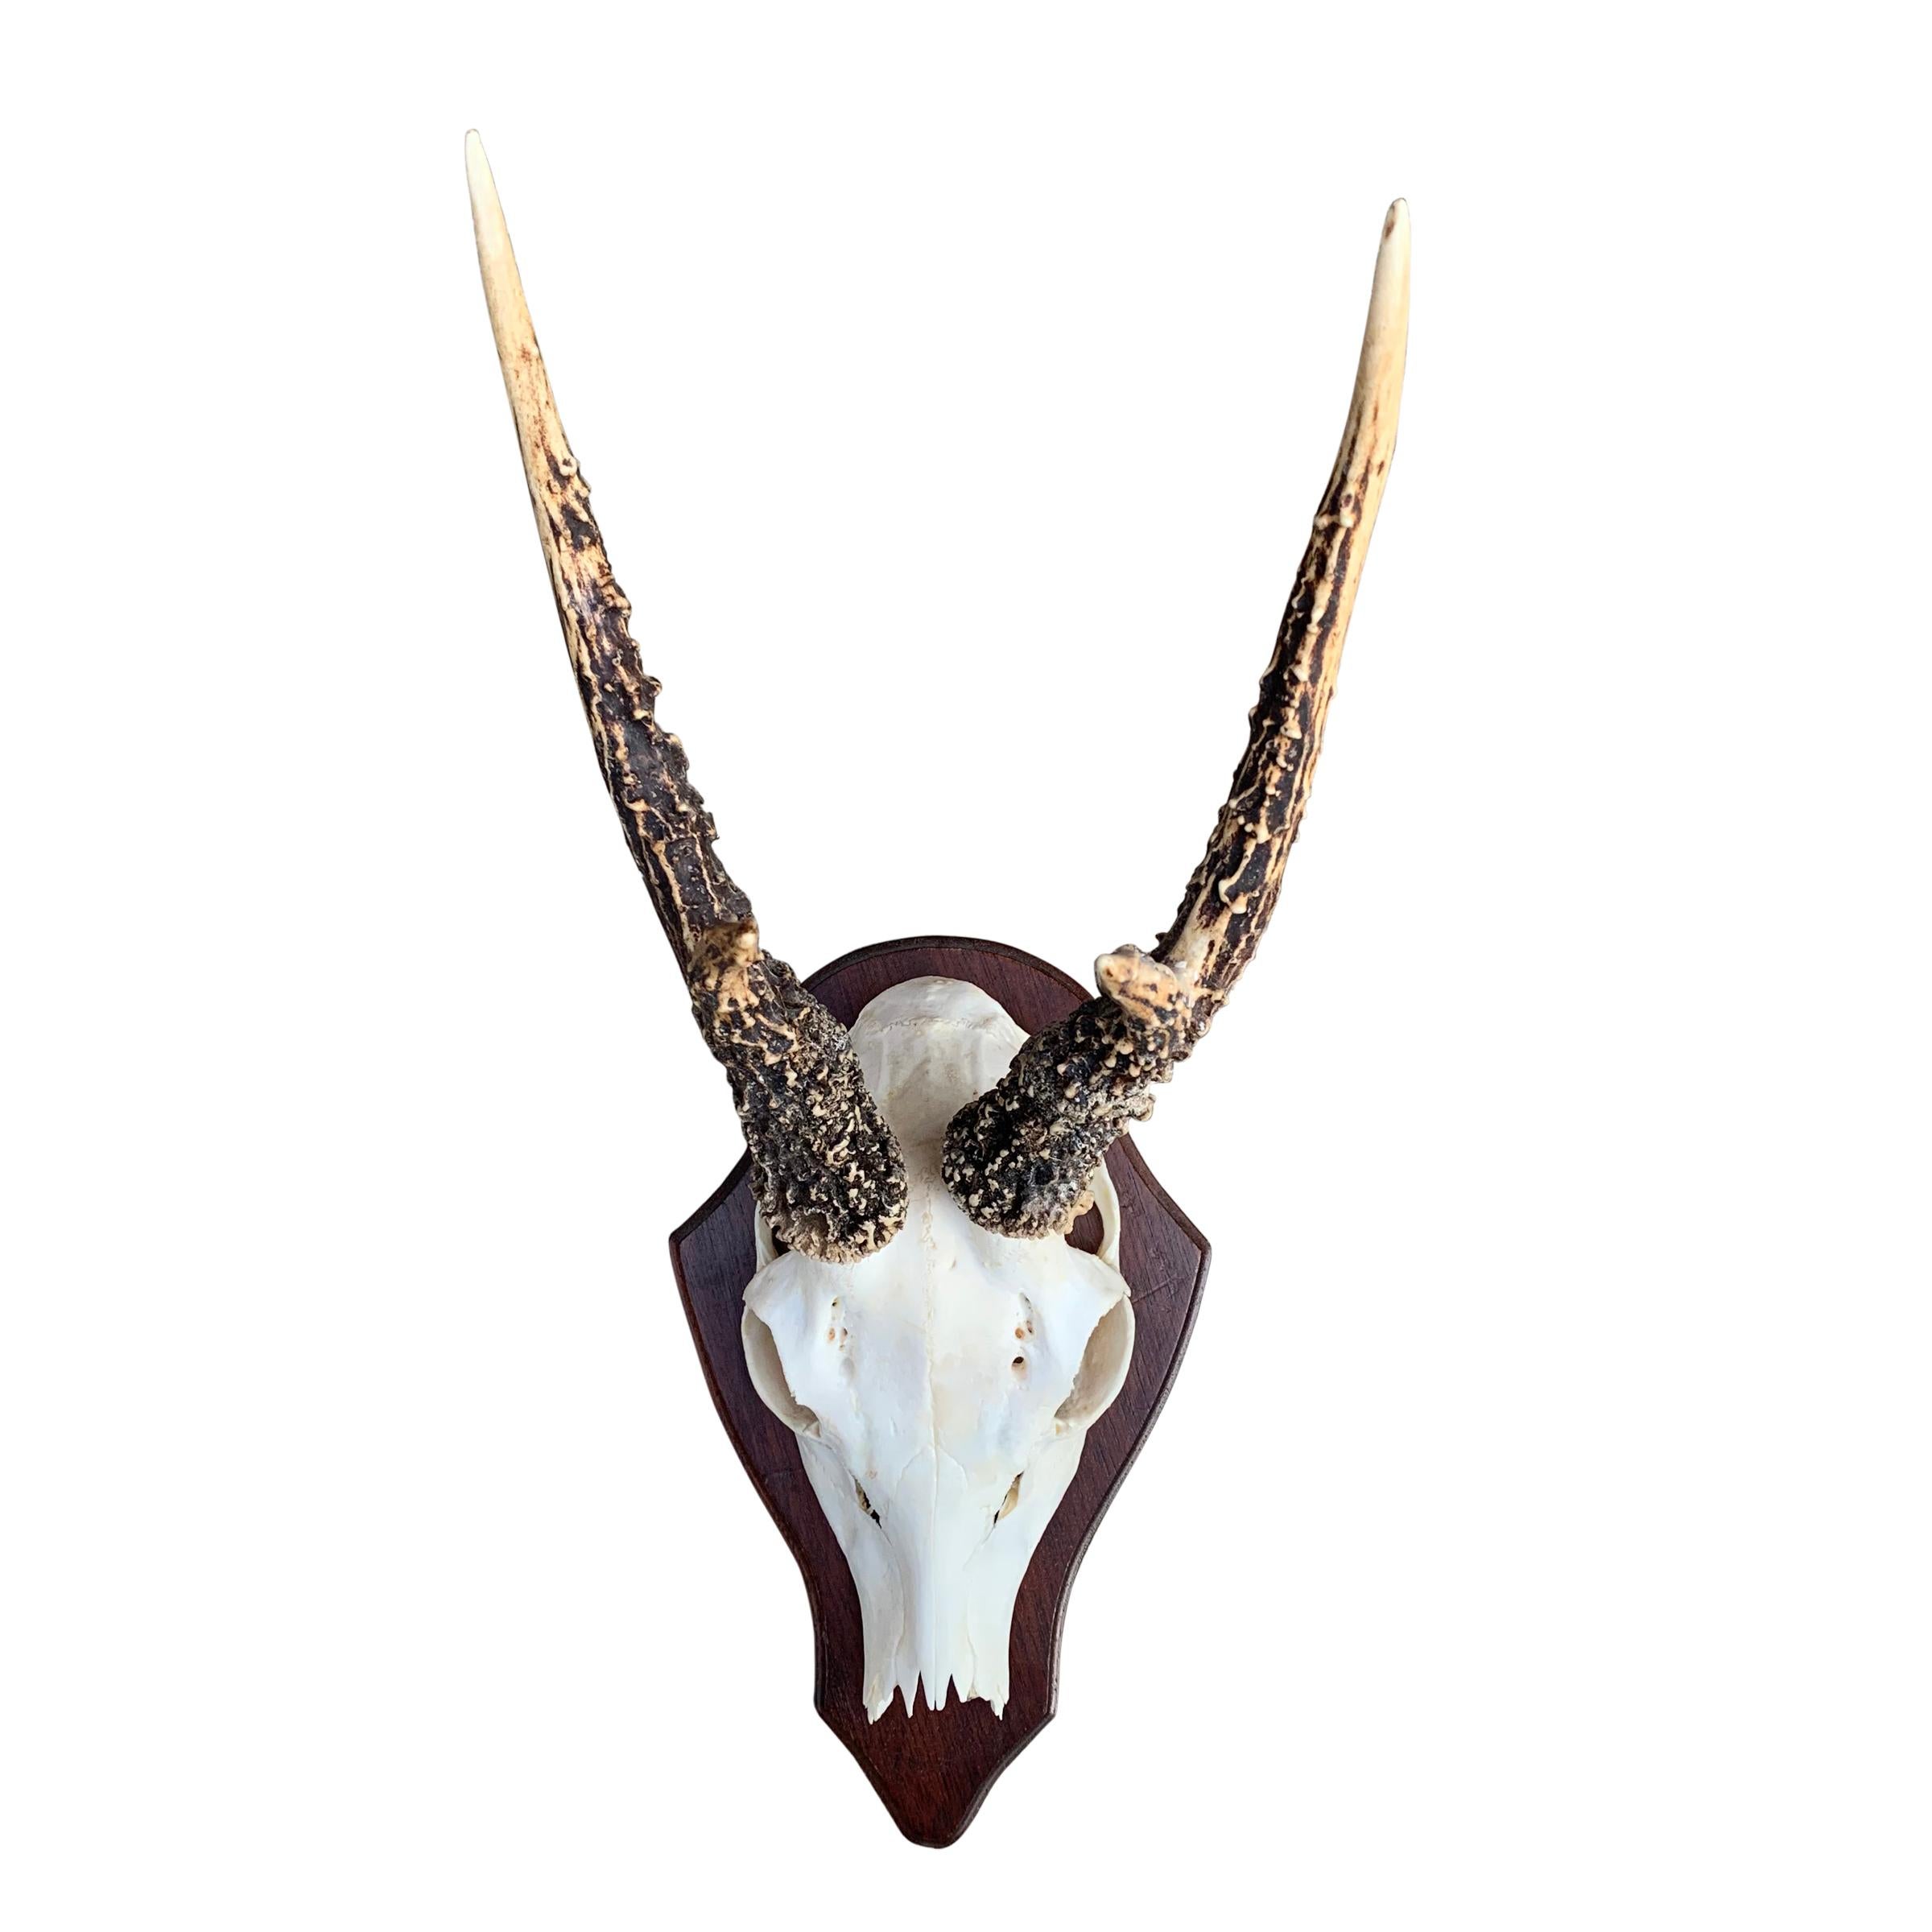 A great collection of ten 20th century German Roe Deer trophy mounts including the skull caps and antlers. In years past only landowners were allowed to hunt game, and often showed off their wealth by hanging trophy mounts throughout their grande